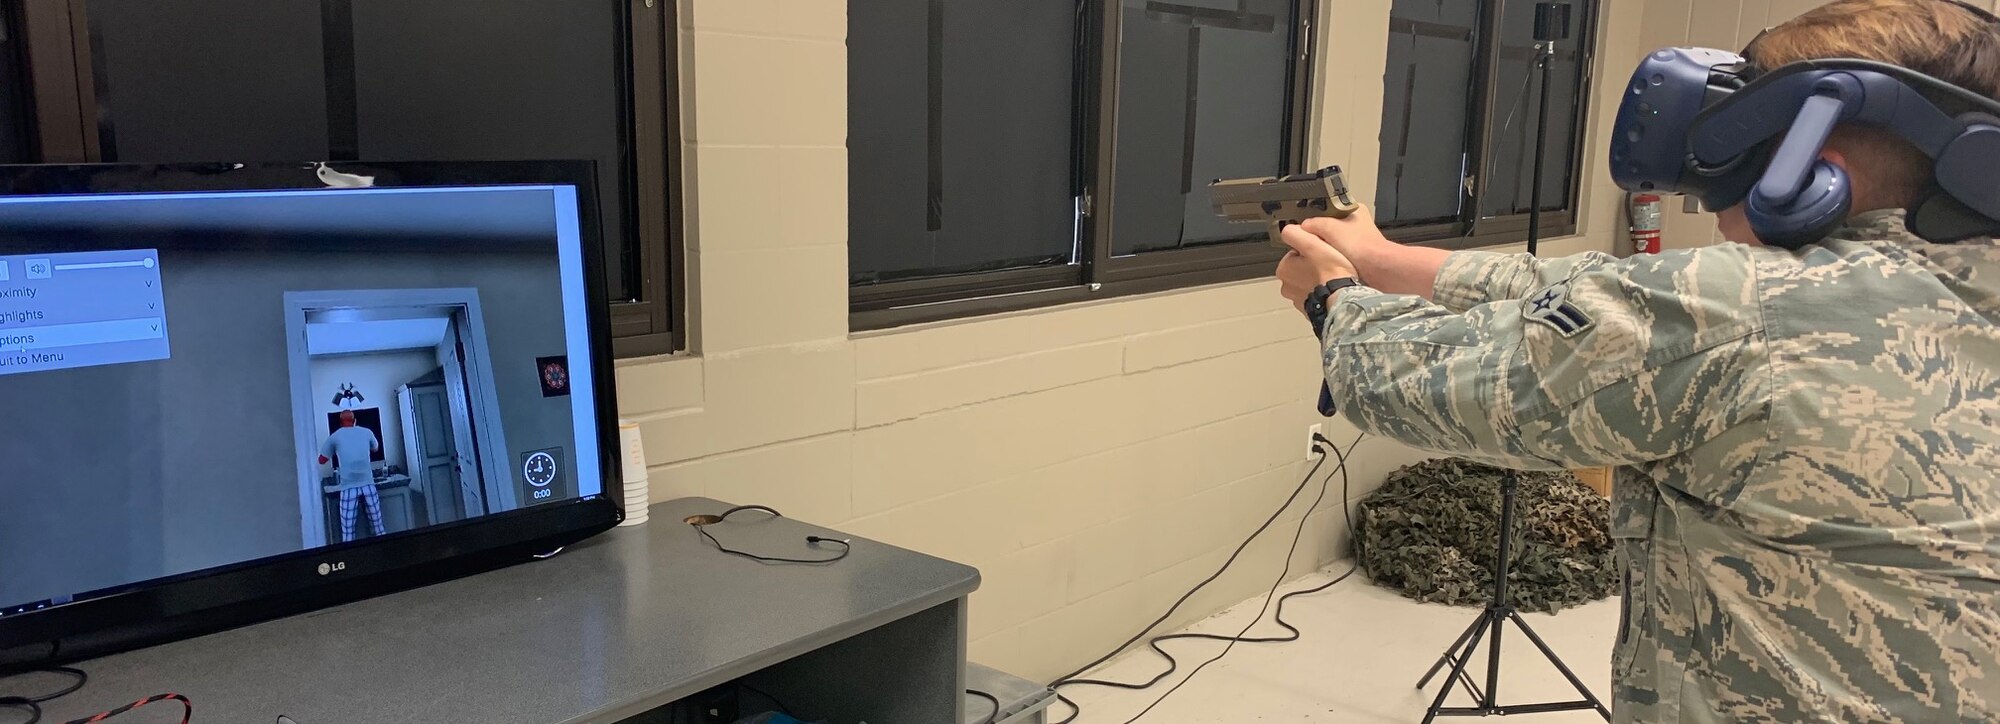 Airman 1st Class Taylor Waldron, a recent graduate of the Security Forces apprentice course, participates in a use of force training scenario in a virtual reality environment simulator at Joint Base San Antonio-Lackland, Texas, May 29, 2019. The 343rd Training Squadron has added the VR training simulators as part of a beta-test in conjunction with a civilian vendor at no cost to the unit through a partnership with AFWERX.  (U.S. Air Force photo bu Dan Hawkins)